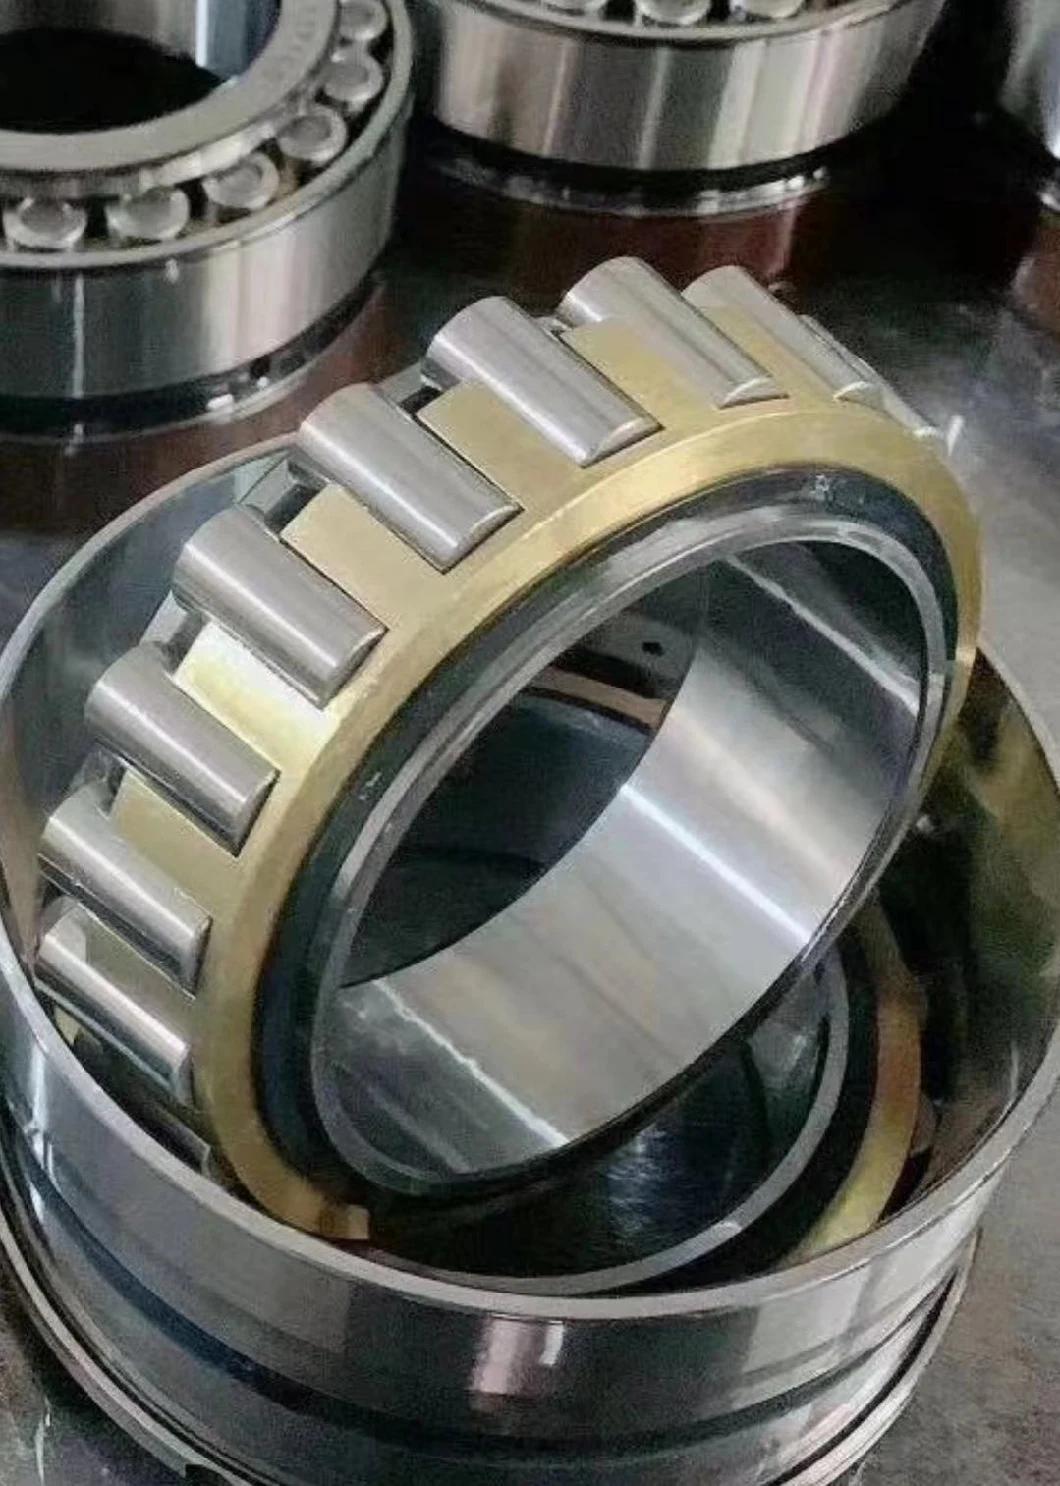 Tapered Roller Bearing 30236*